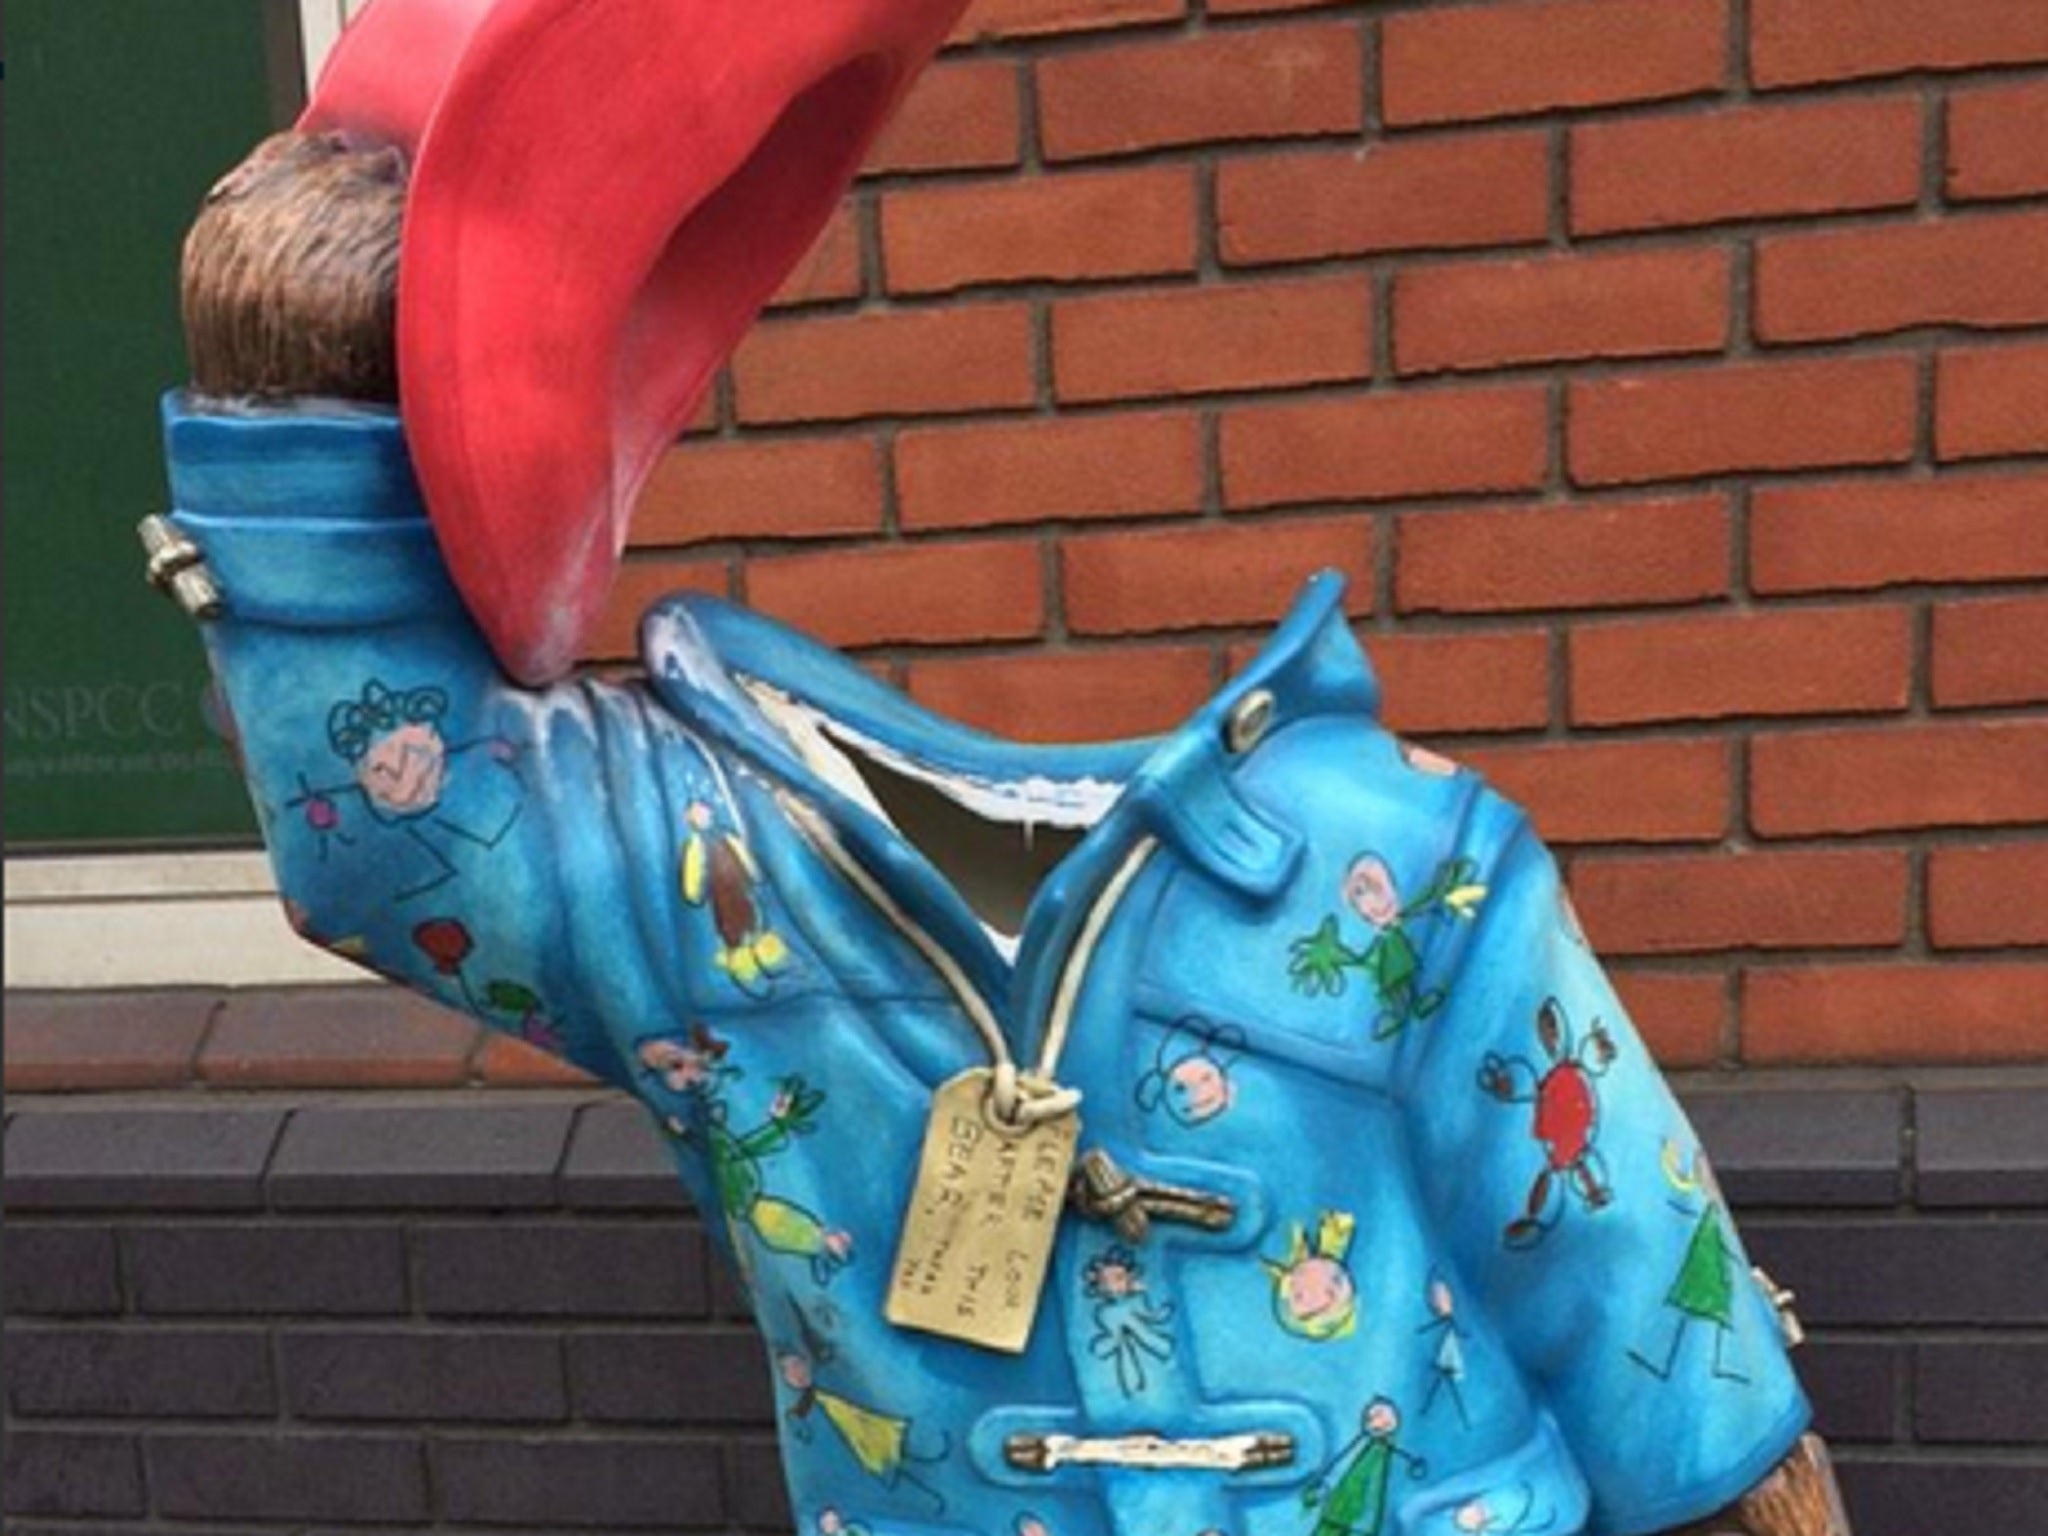 The Paddington Bear as it was found on Curtain Road after it was damaged by vandals